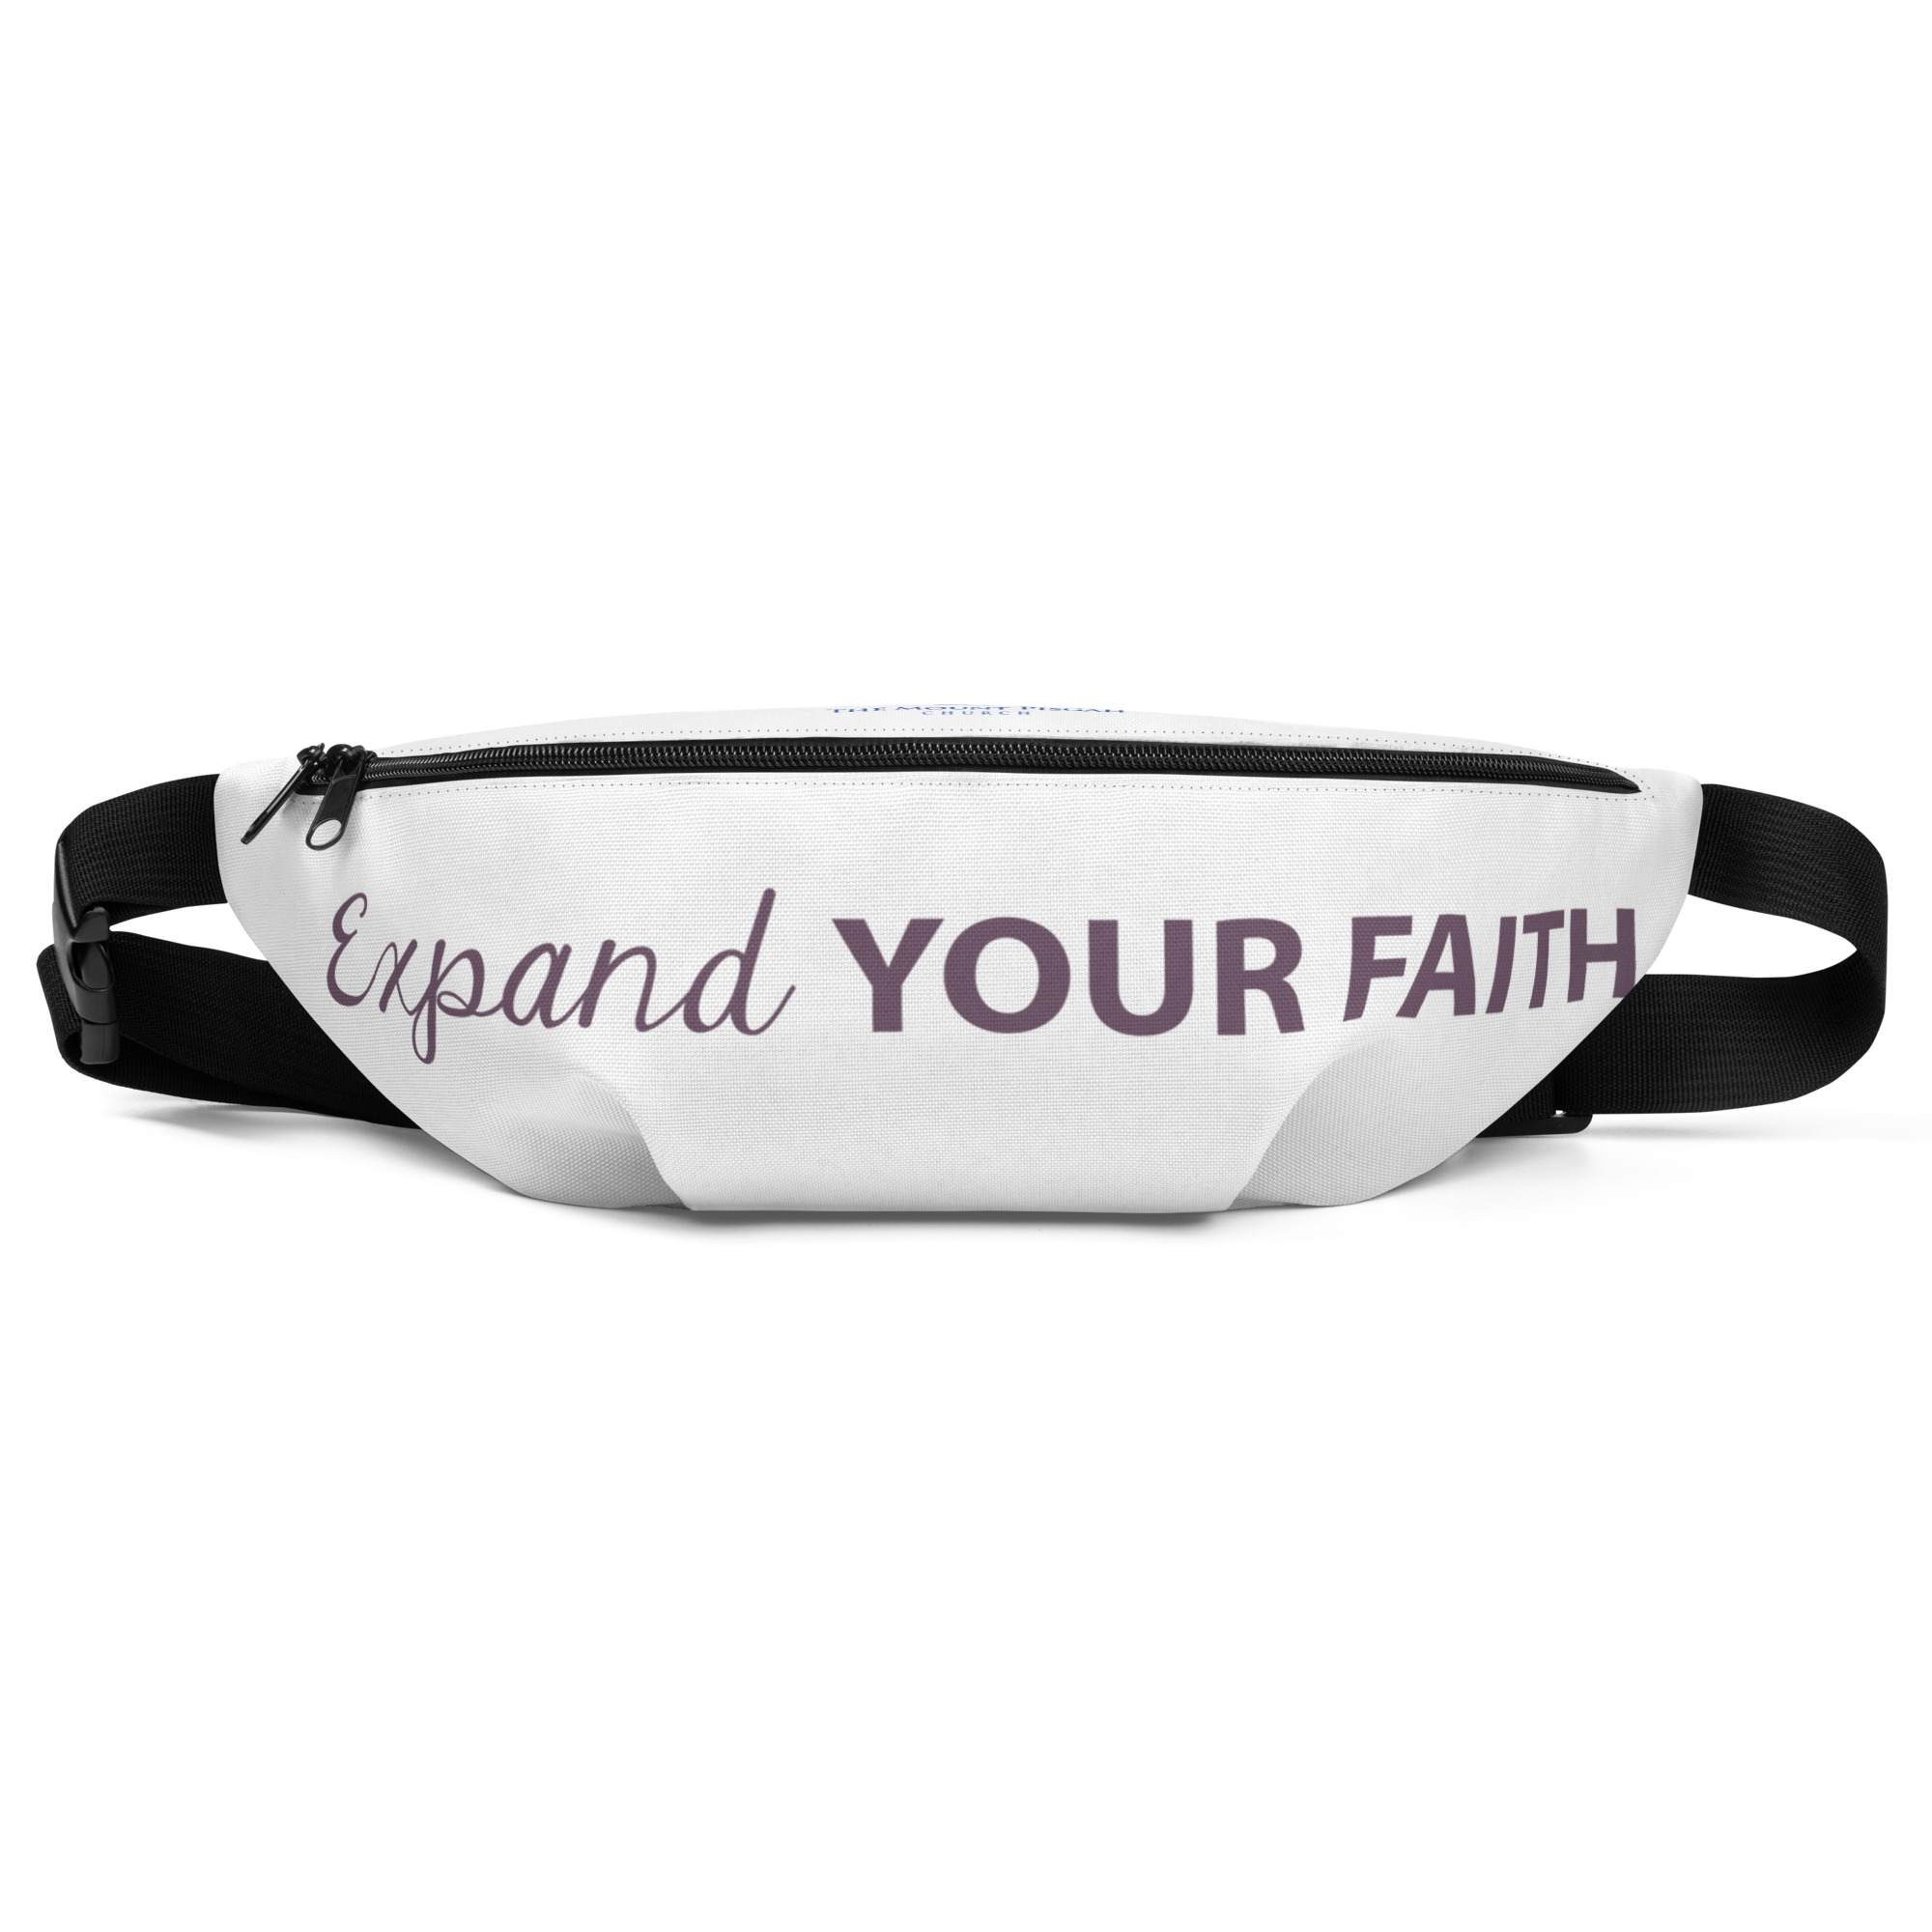 Expand YOUR FAITH Fanny Pack